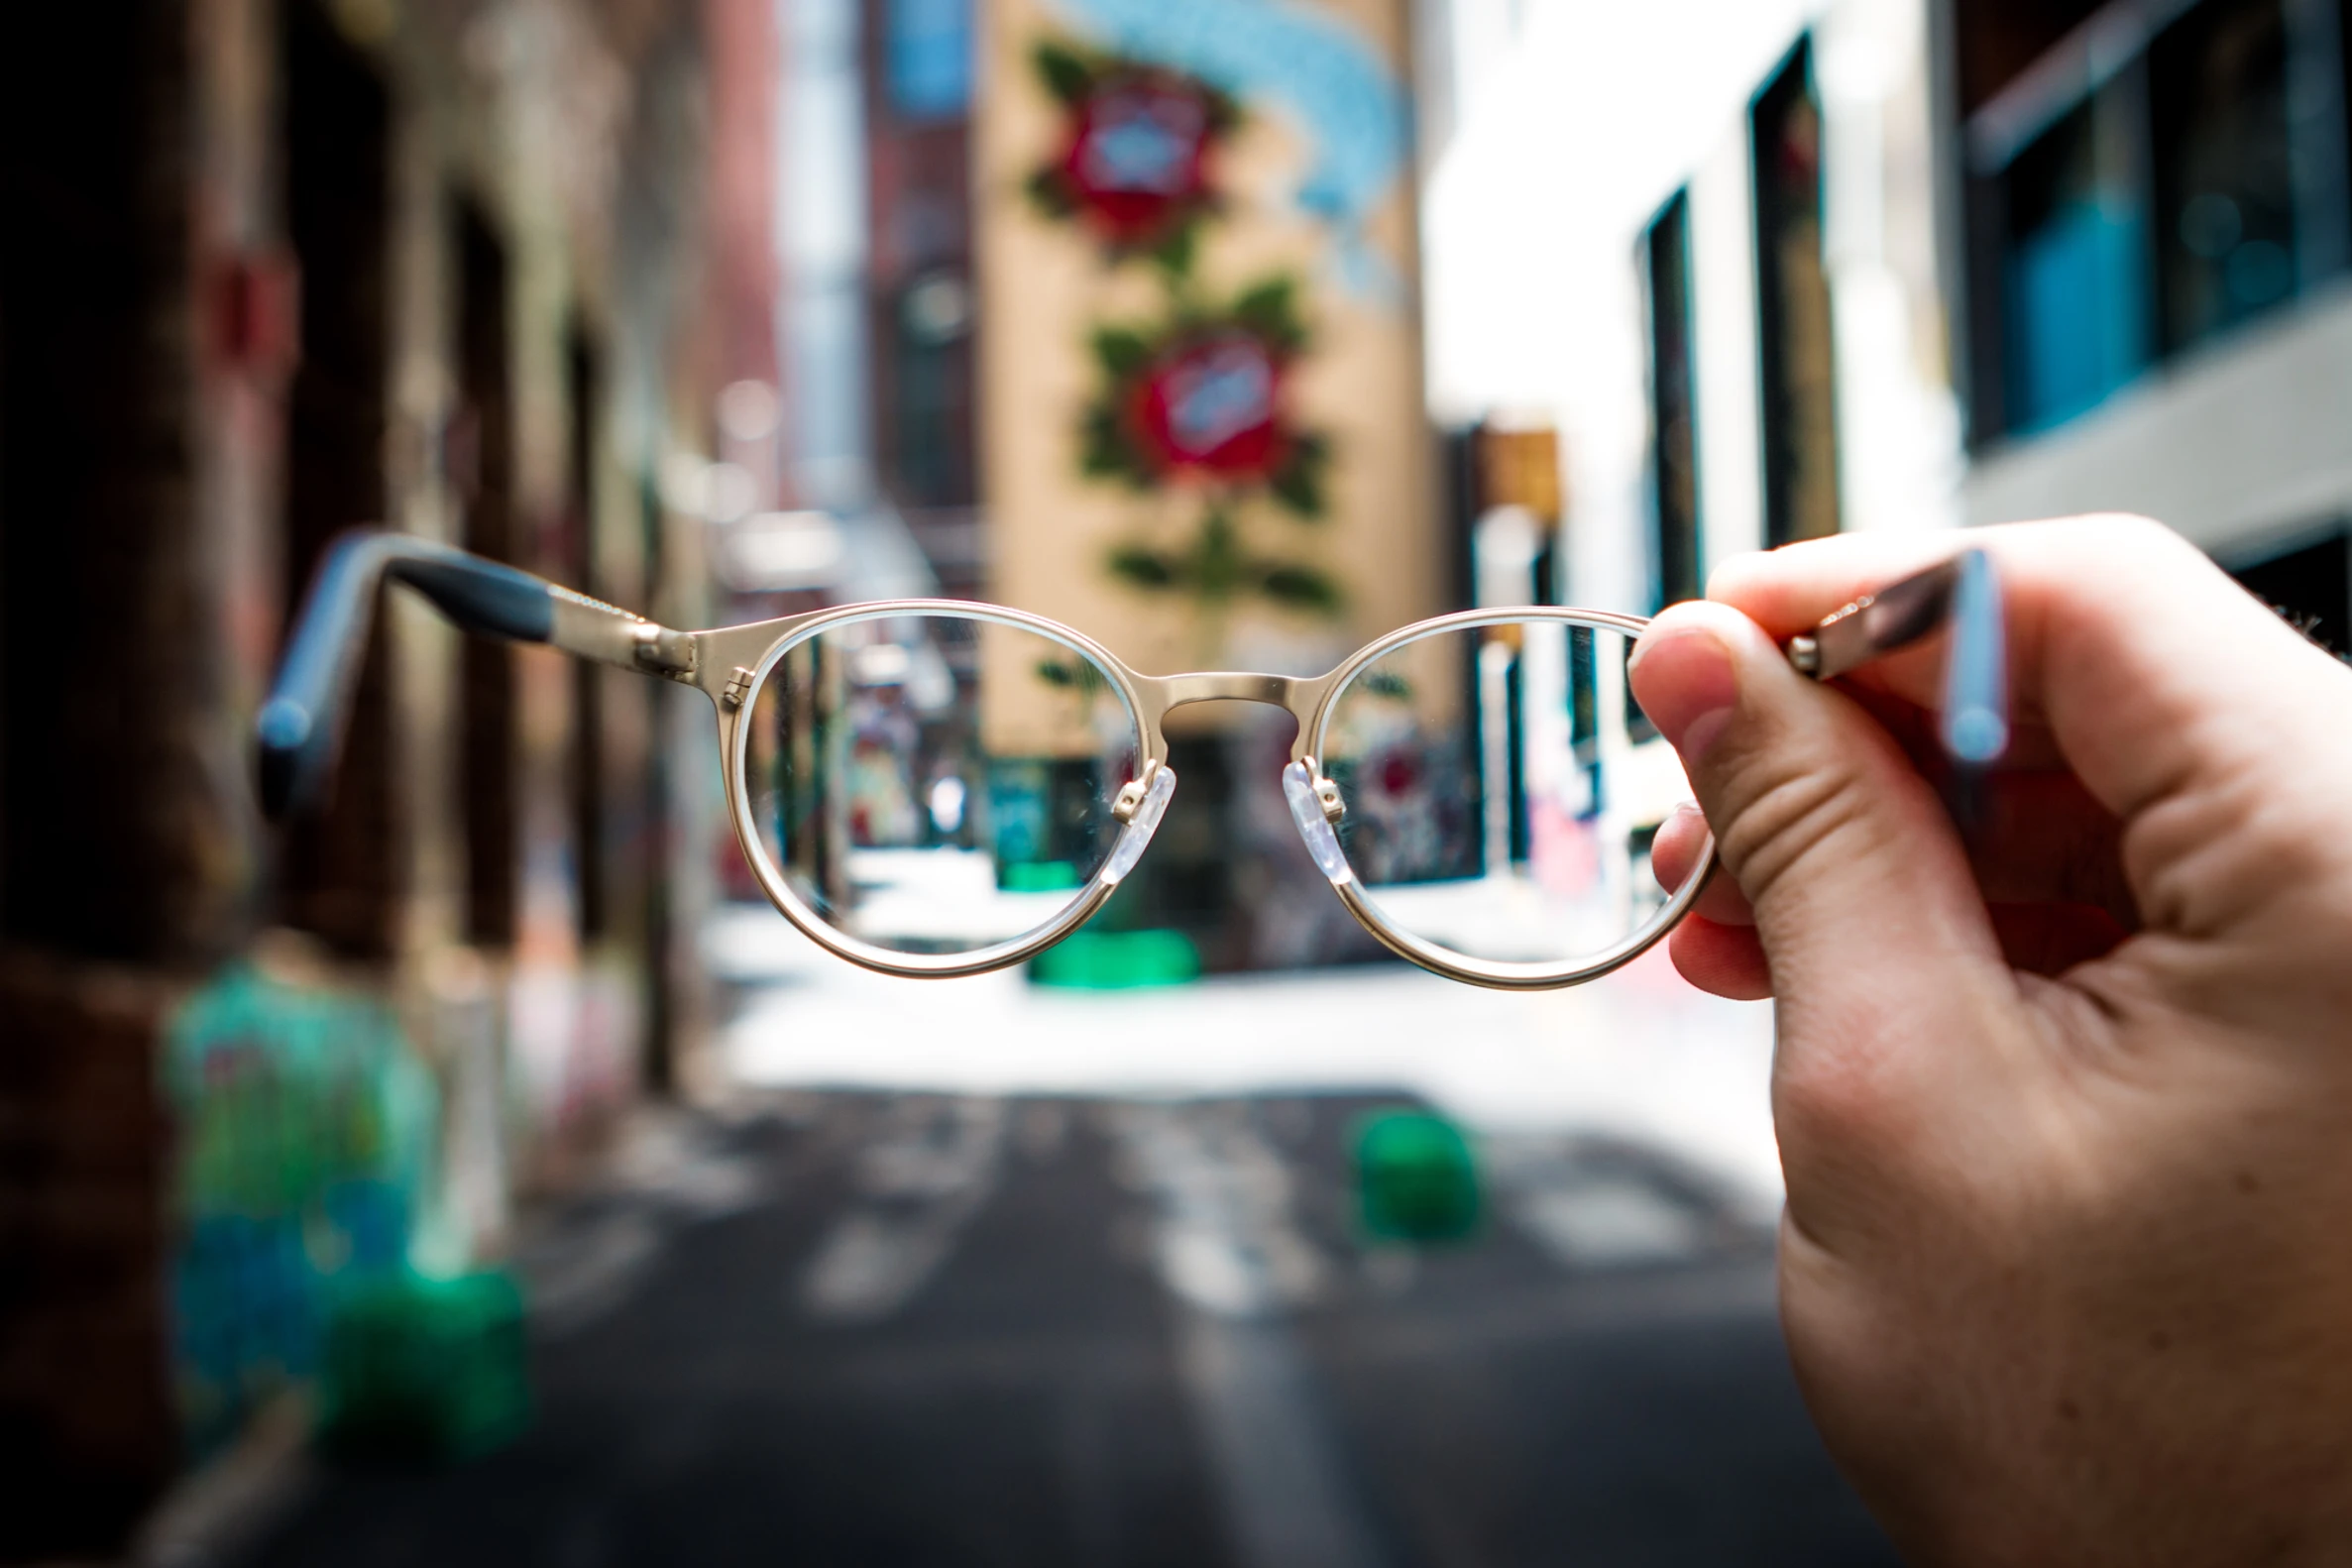 A pair of glasses are held up in front of the camera, making the unfocused street ahead clearer